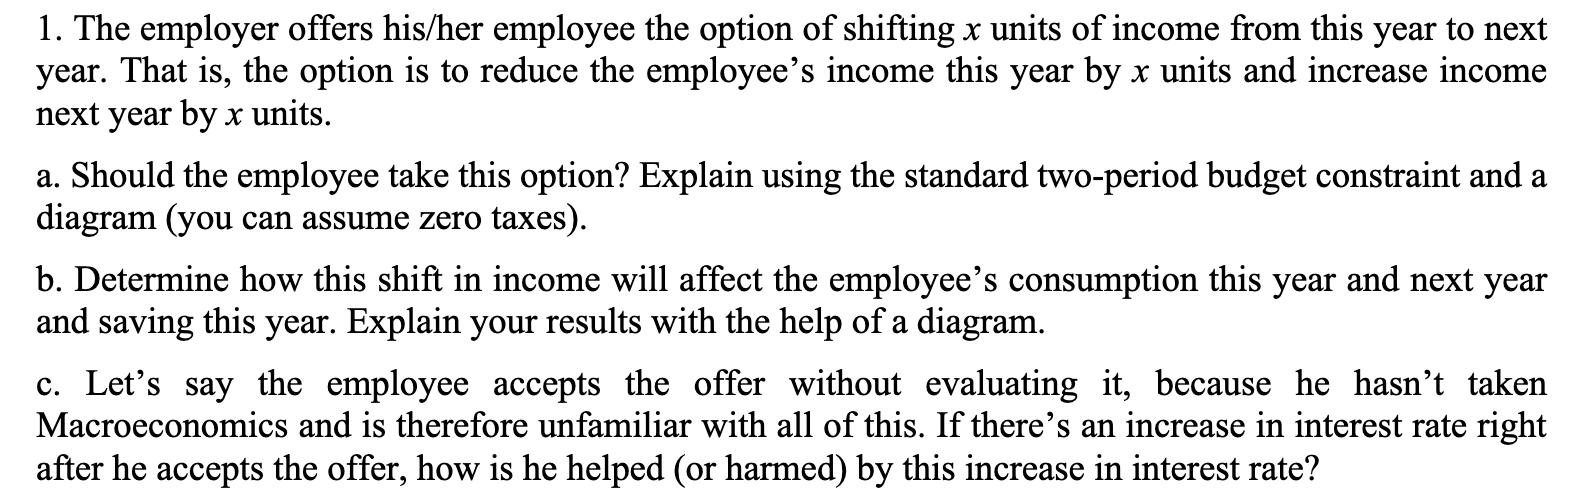 1. The employer offers his/her employee the option of shifting ( x ) units of income from this year to next year. That is,